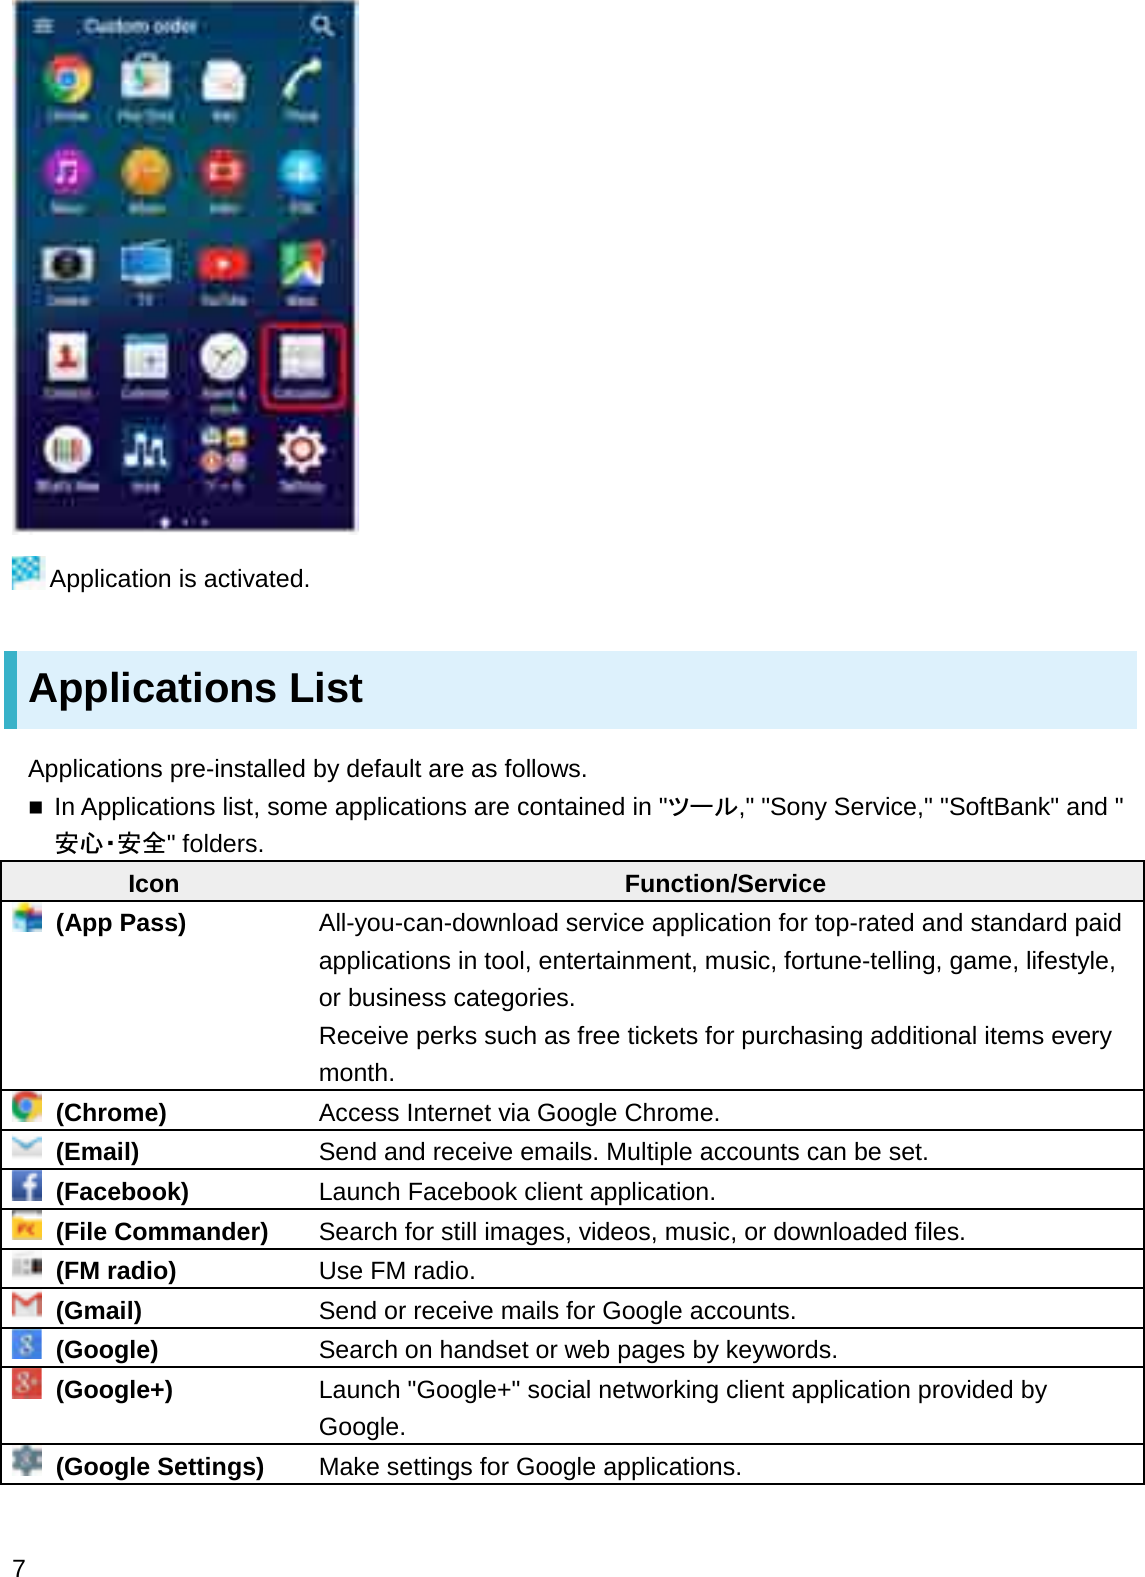 Application is activated.Applications ListApplications pre-installed by default are as follows.In Applications list, some applications are contained in &quot;䝒䞊䝹,&quot; &quot;Sony Service,&quot; &quot;SoftBank&quot; and &quot;Ᏻᚰ䞉Ᏻ඲&quot; folders.Icon Function/Service(App Pass) All-you-can-download service application for top-rated and standard paid applications in tool, entertainment, music, fortune-telling, game, lifestyle, or business categories. Receive perks such as free tickets for purchasing additional items every month.(Chrome) Access Internet via Google Chrome.(Email) Send and receive emails. Multiple accounts can be set.(Facebook) Launch Facebook client application.(File Commander) Search for still images, videos, music, or downloaded files.(FM radio) Use FM radio.(Gmail) Send or receive mails for Google accounts.(Google) Search on handset or web pages by keywords.(Google+) Launch &quot;Google+&quot; social networking client application provided by Google.(Google Settings) Make settings for Google applications.7